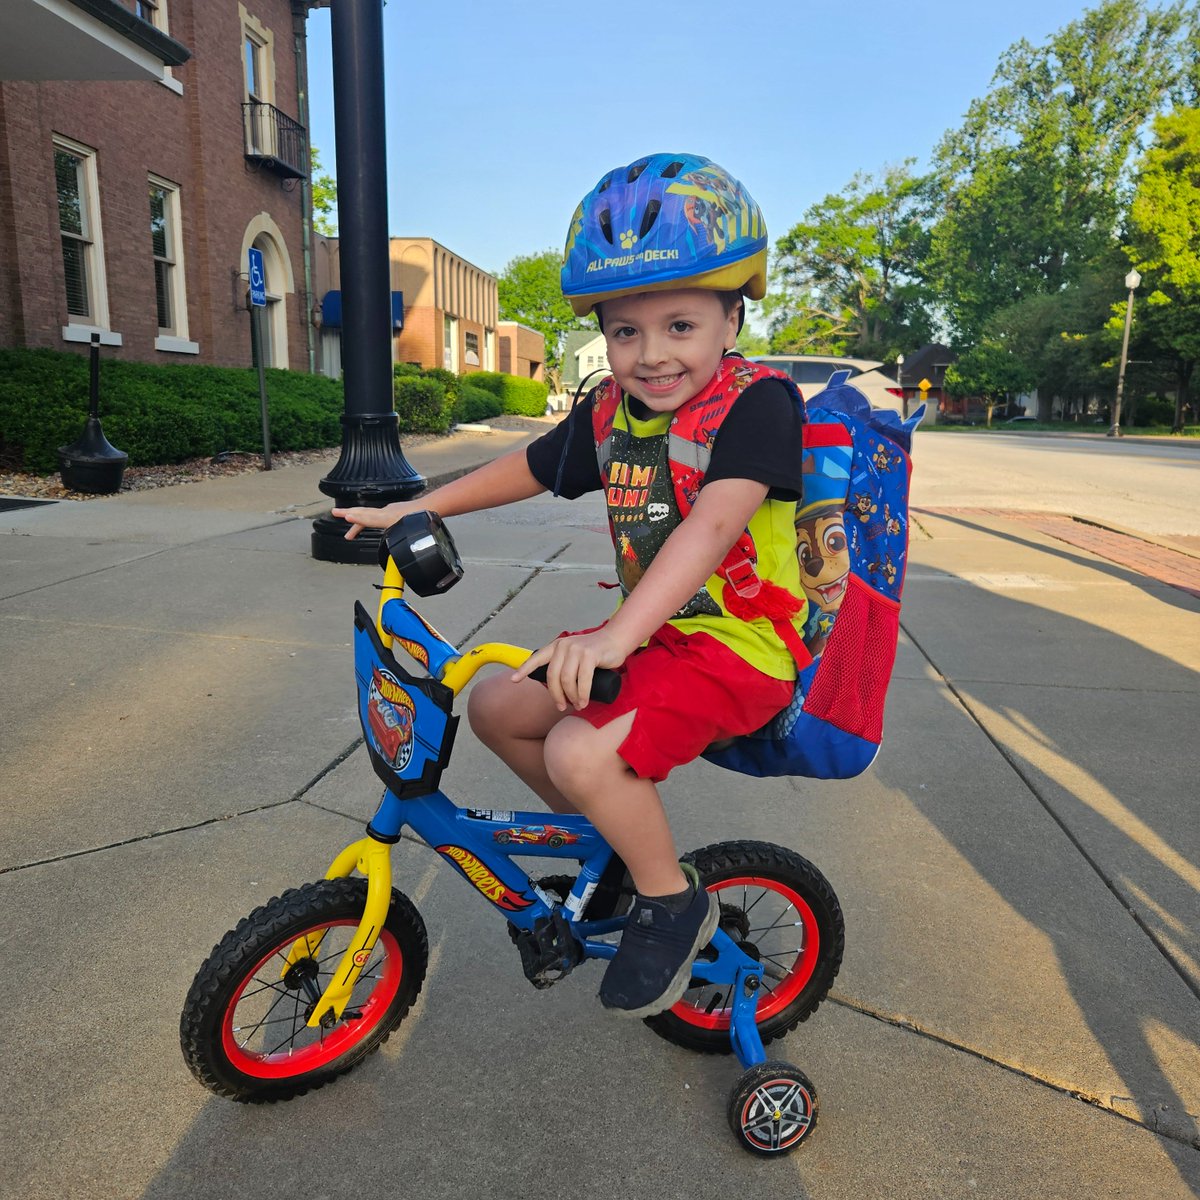 More than 2,400 #BikeRolltoSchoolDay 2024 events have been registered to date. Way to go! If you weren’t able to join the May 8 celebration, there is still time! Register any event held in May at walkbiketoschool.org to join the national count.